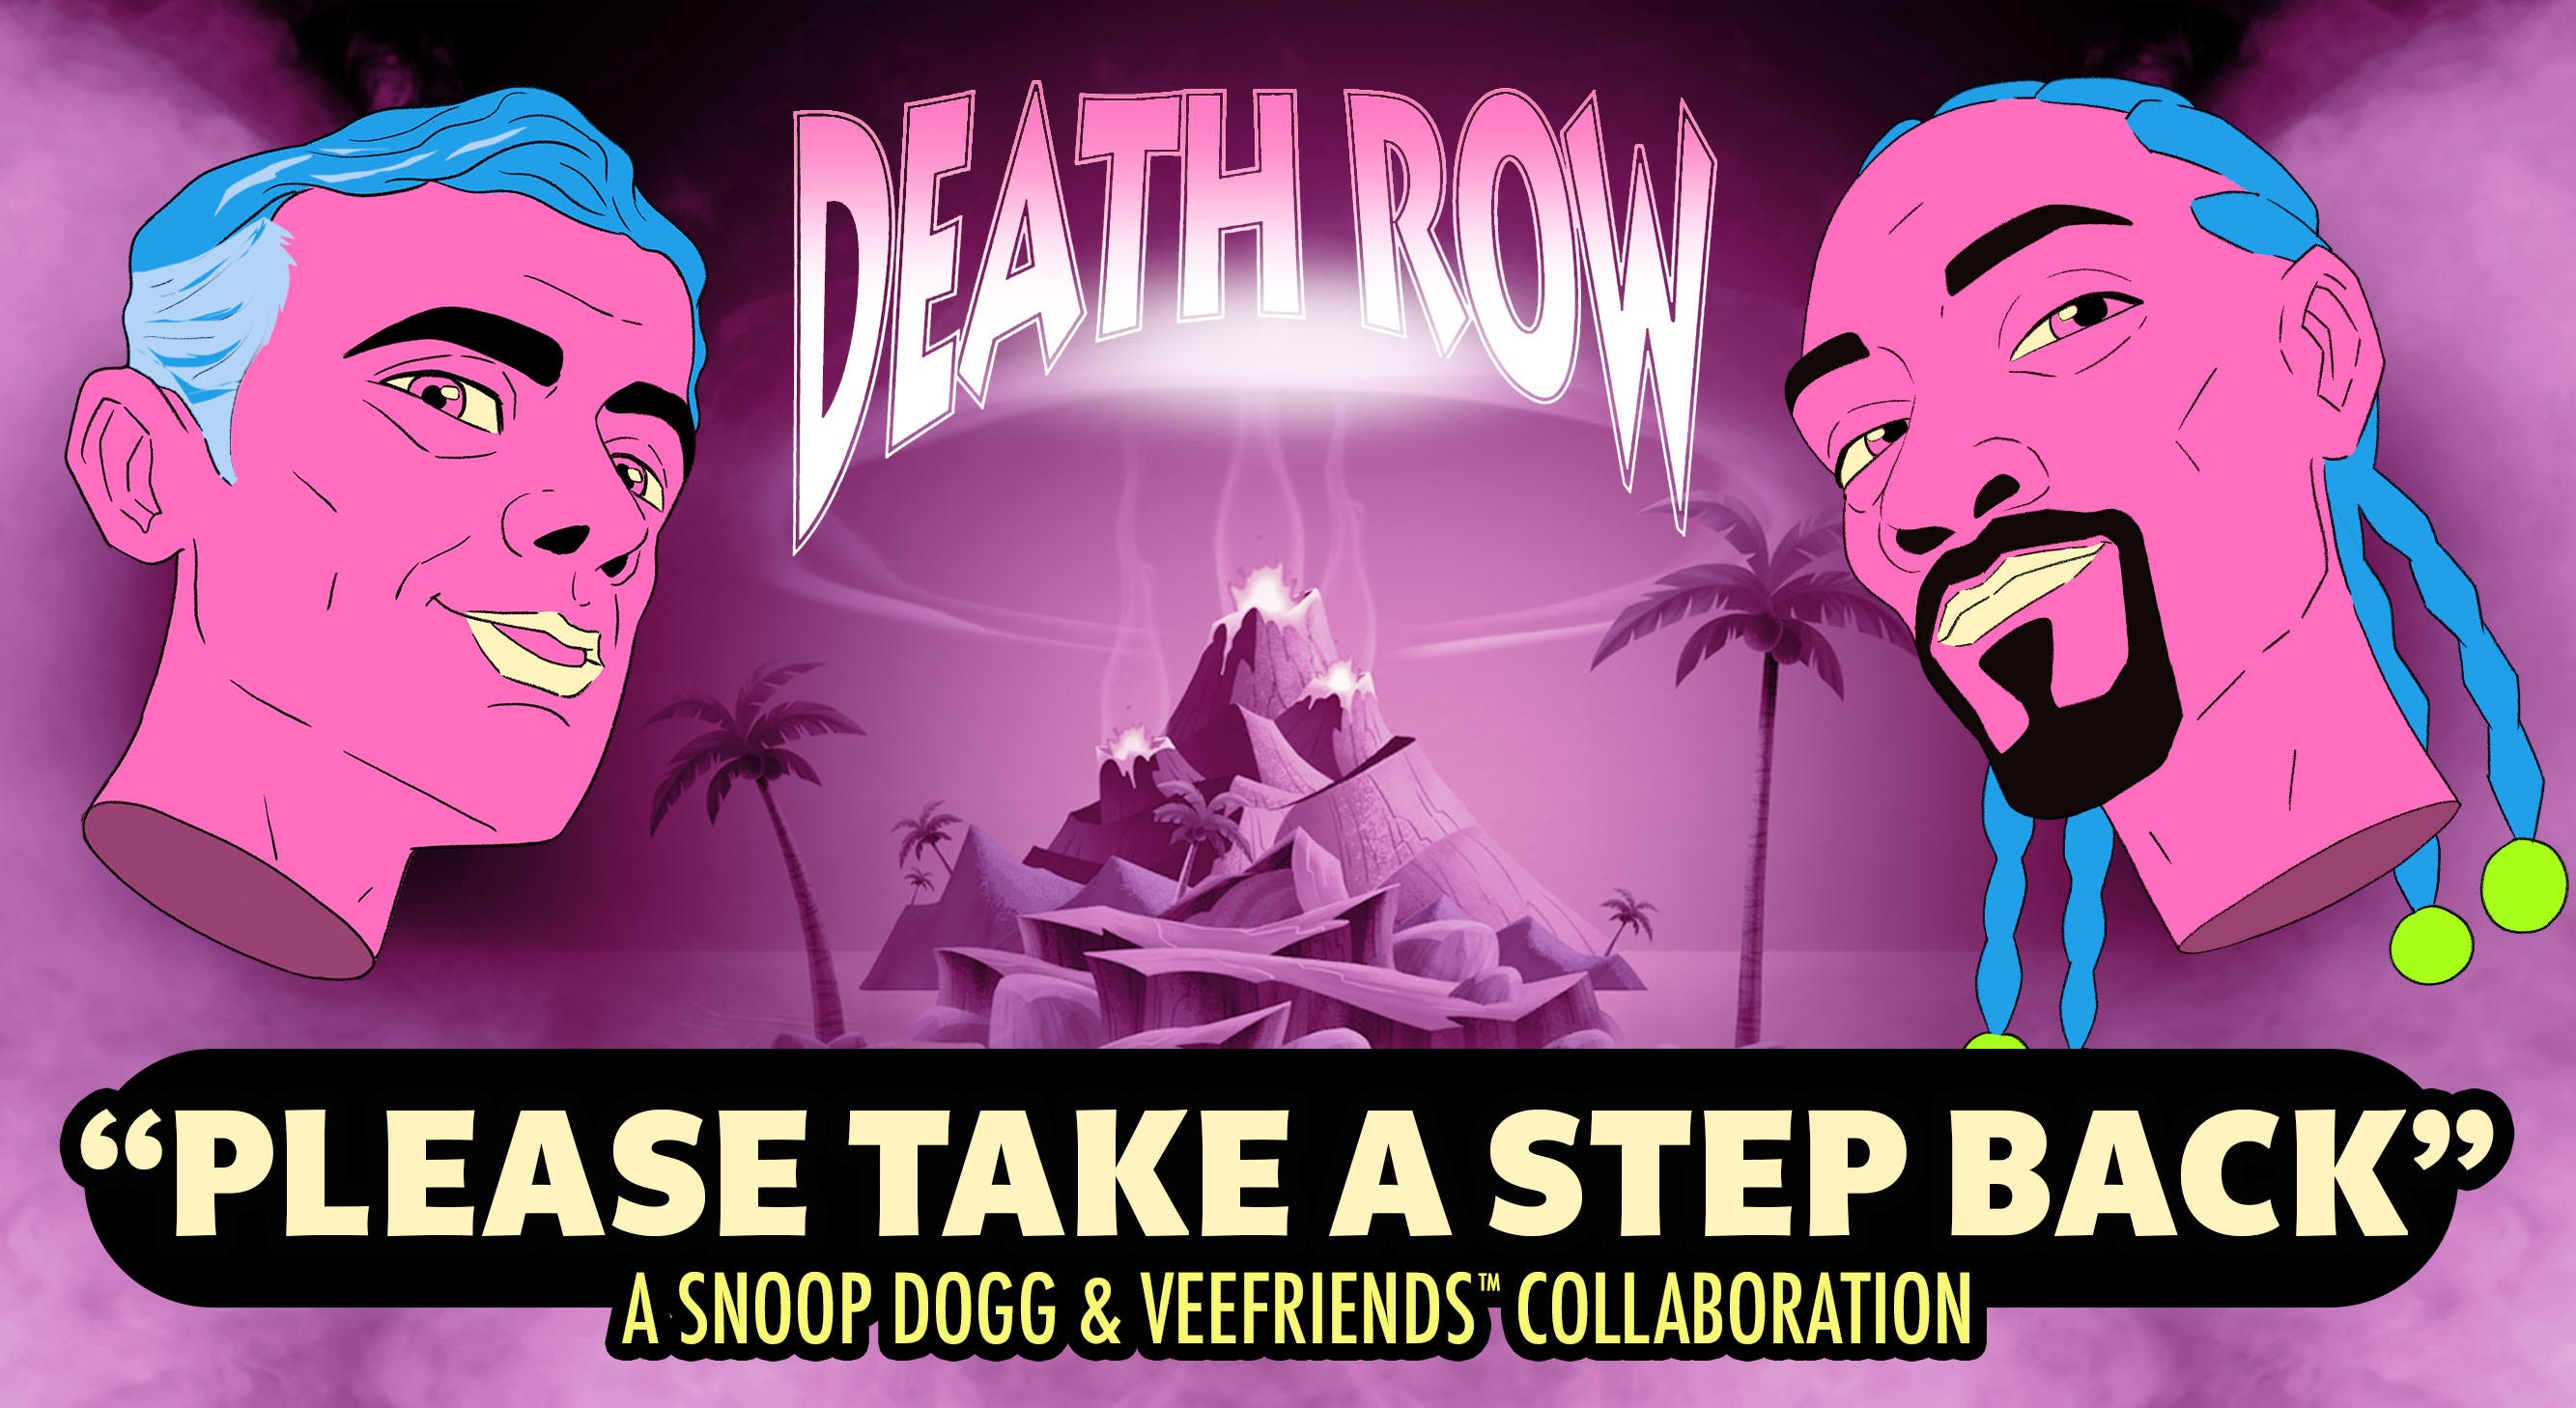 Announcing “Please Take a Step Back” Snoop Dogg & VeeFriends’ Collaborative NFT Collection and Song